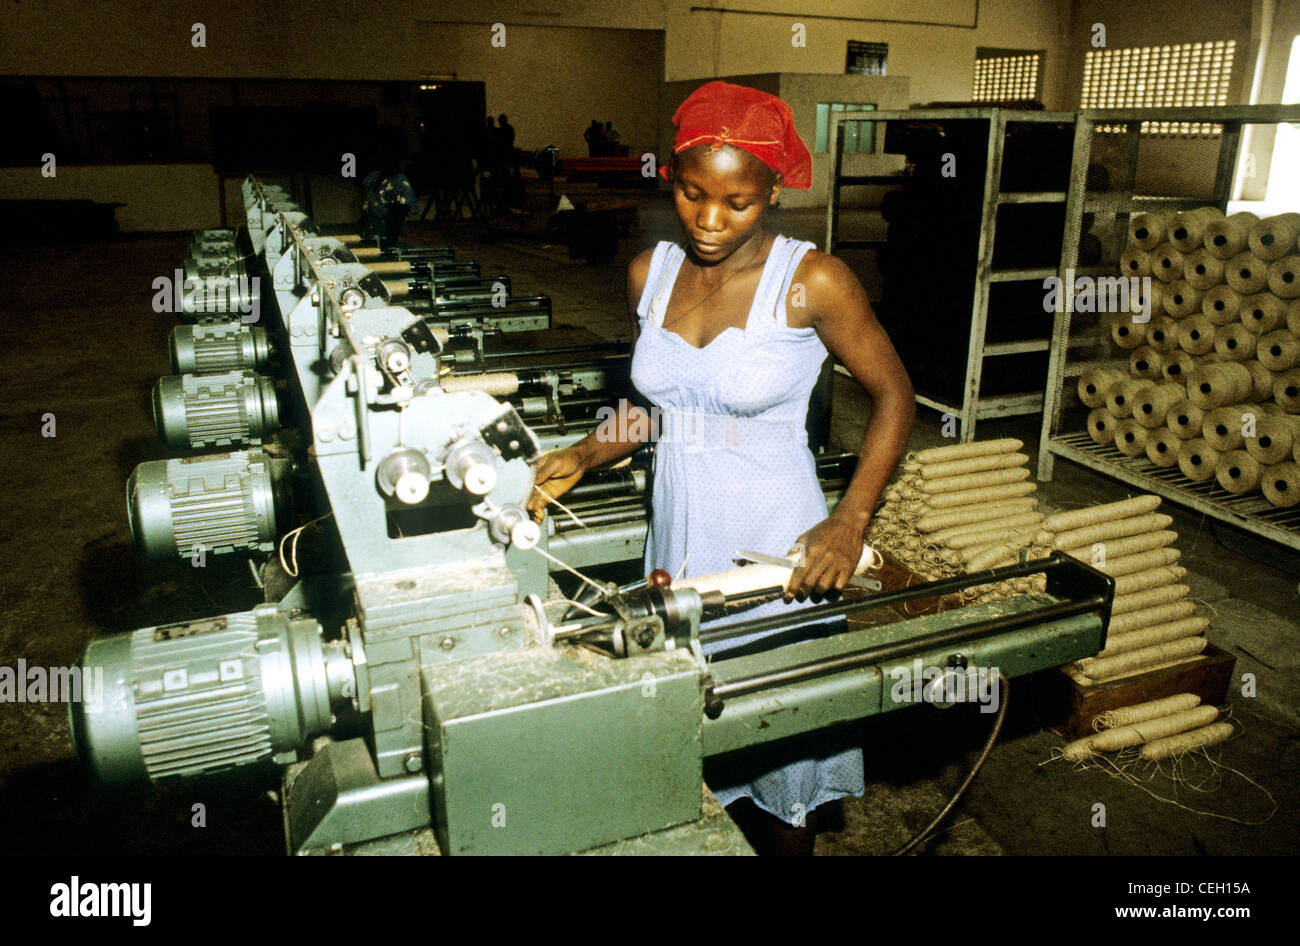 Kilosa Tanzania  East Africa -A young woman operates a row of machines which process sisal. Stock Photo